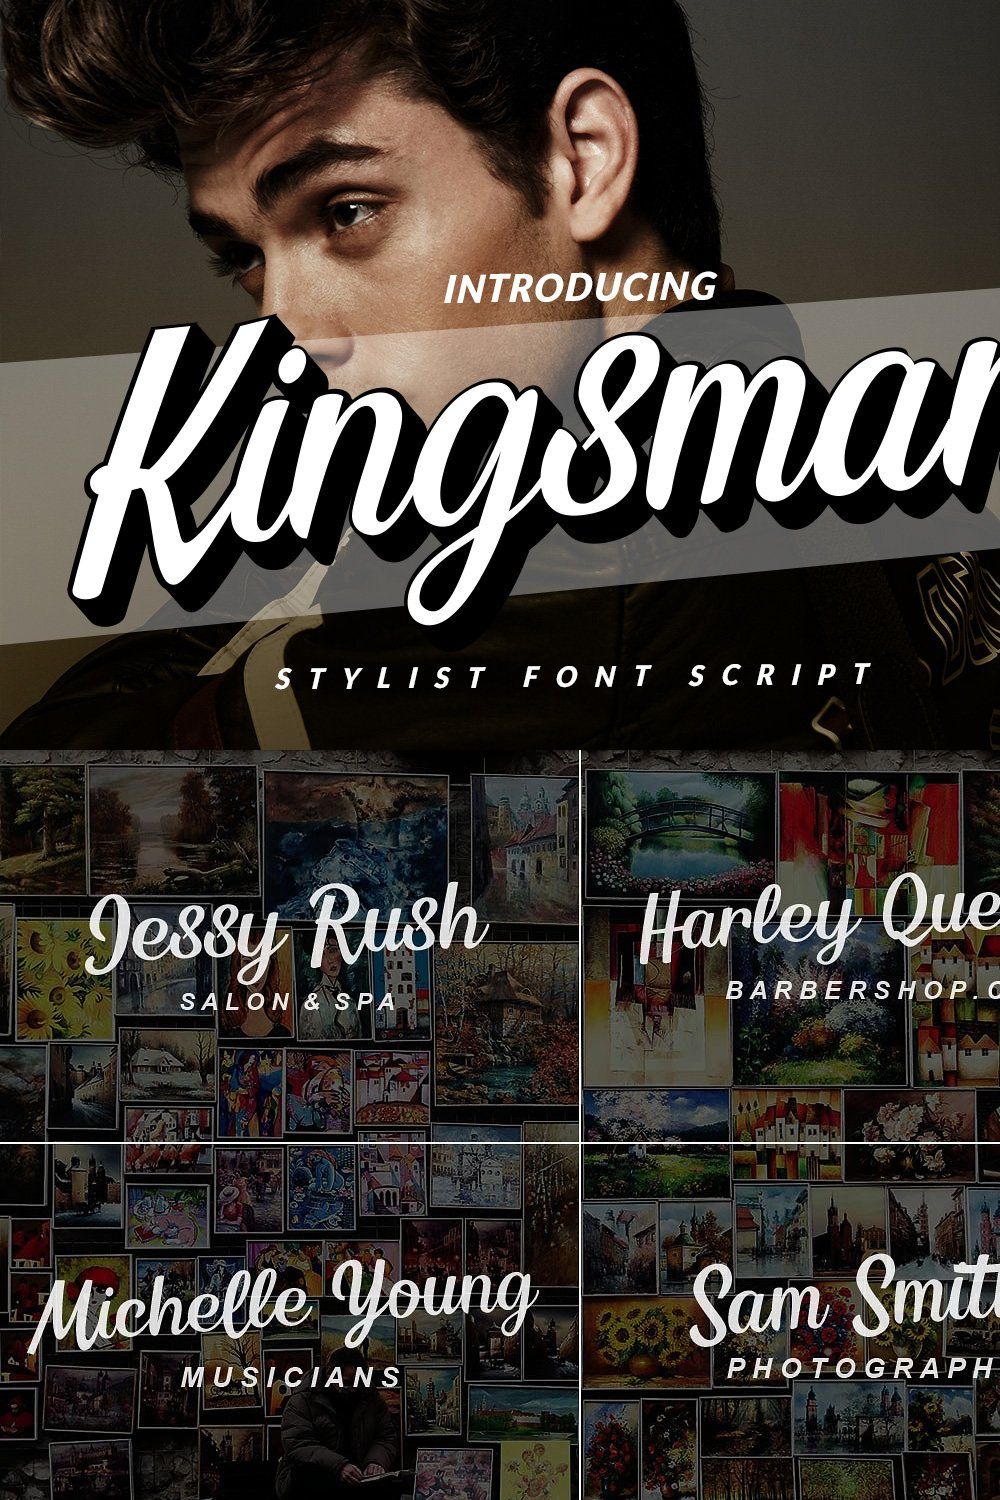 Kingsman Dual Style! (2 layered) pinterest preview image.